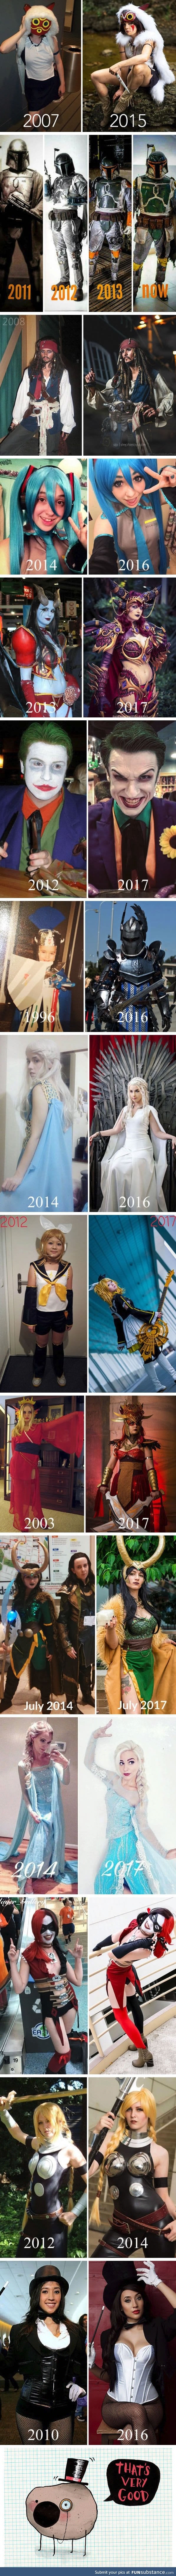 Cosplayers are sharing how their styles evolve over the years